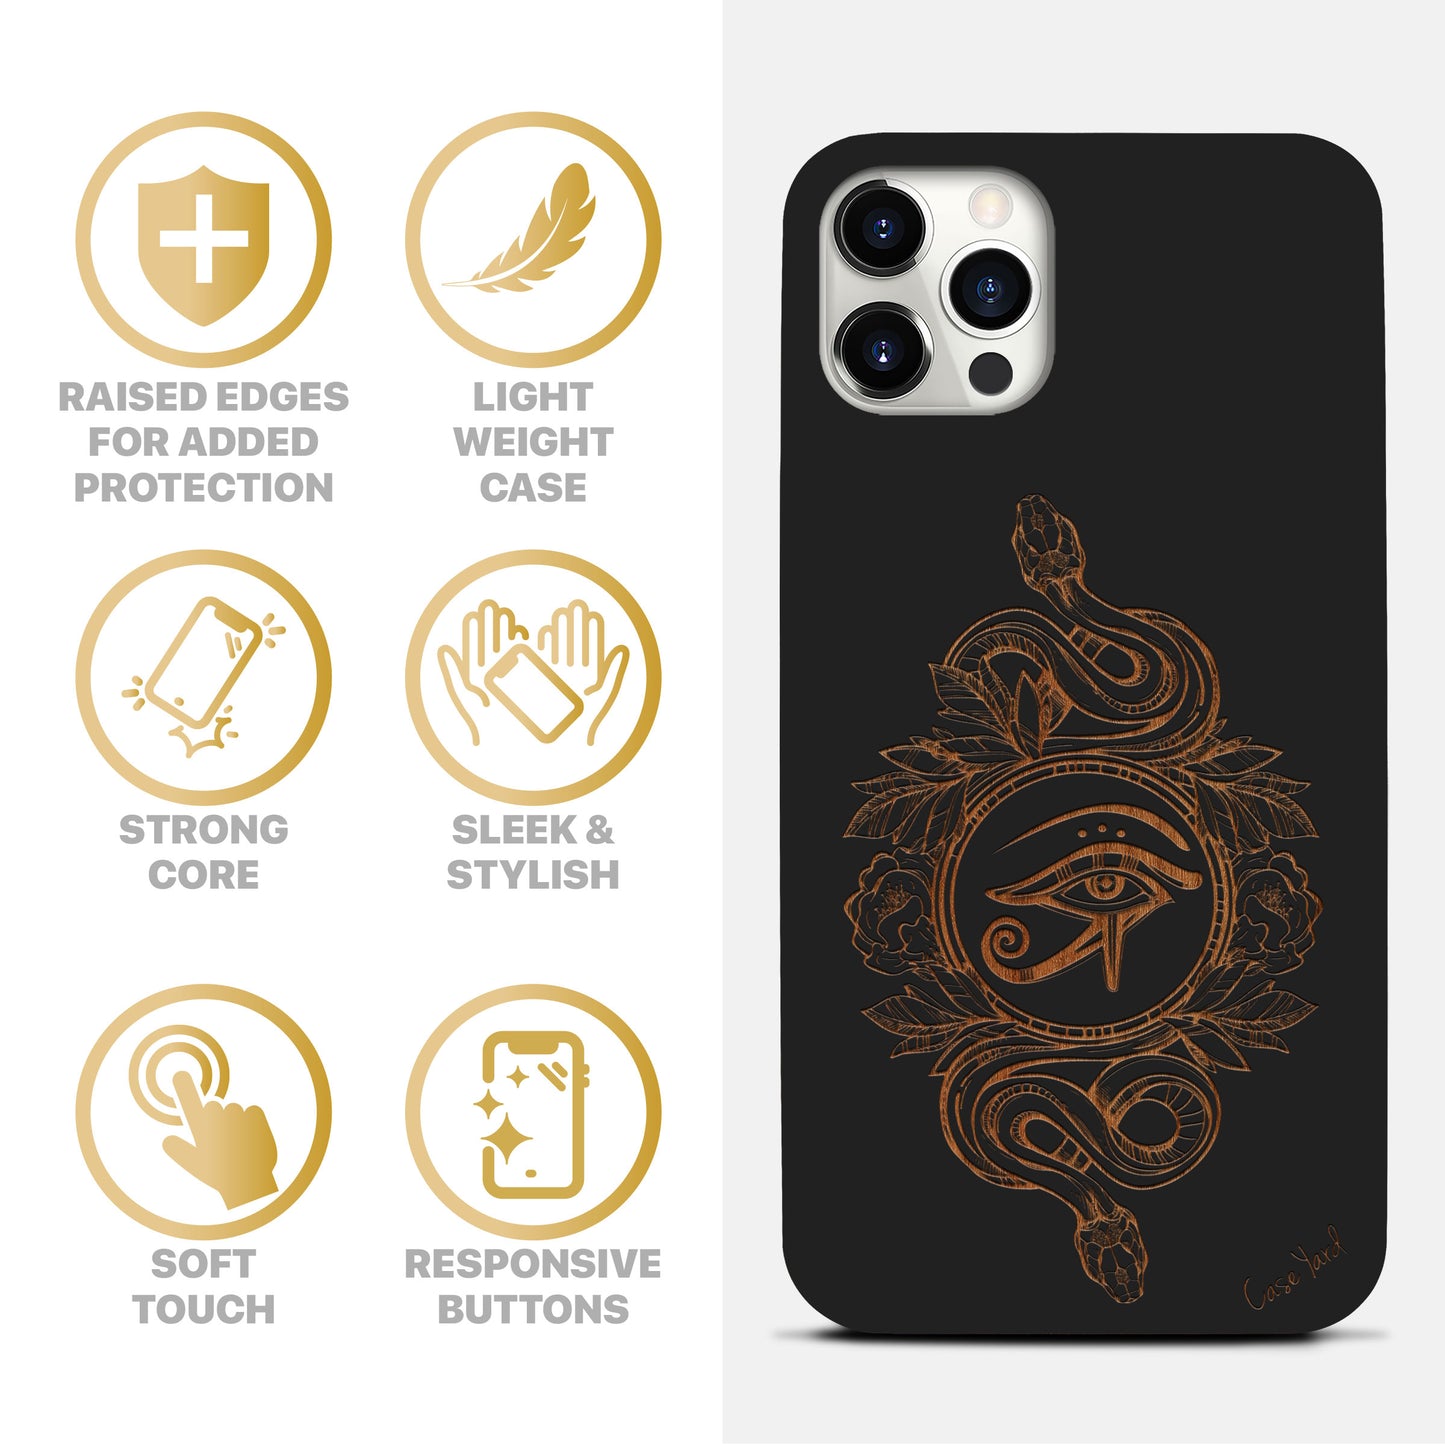 Wooden Cell Phone Case Cover, Laser Engraved case for iPhone & Samsung phone Ra Eye Snake Design